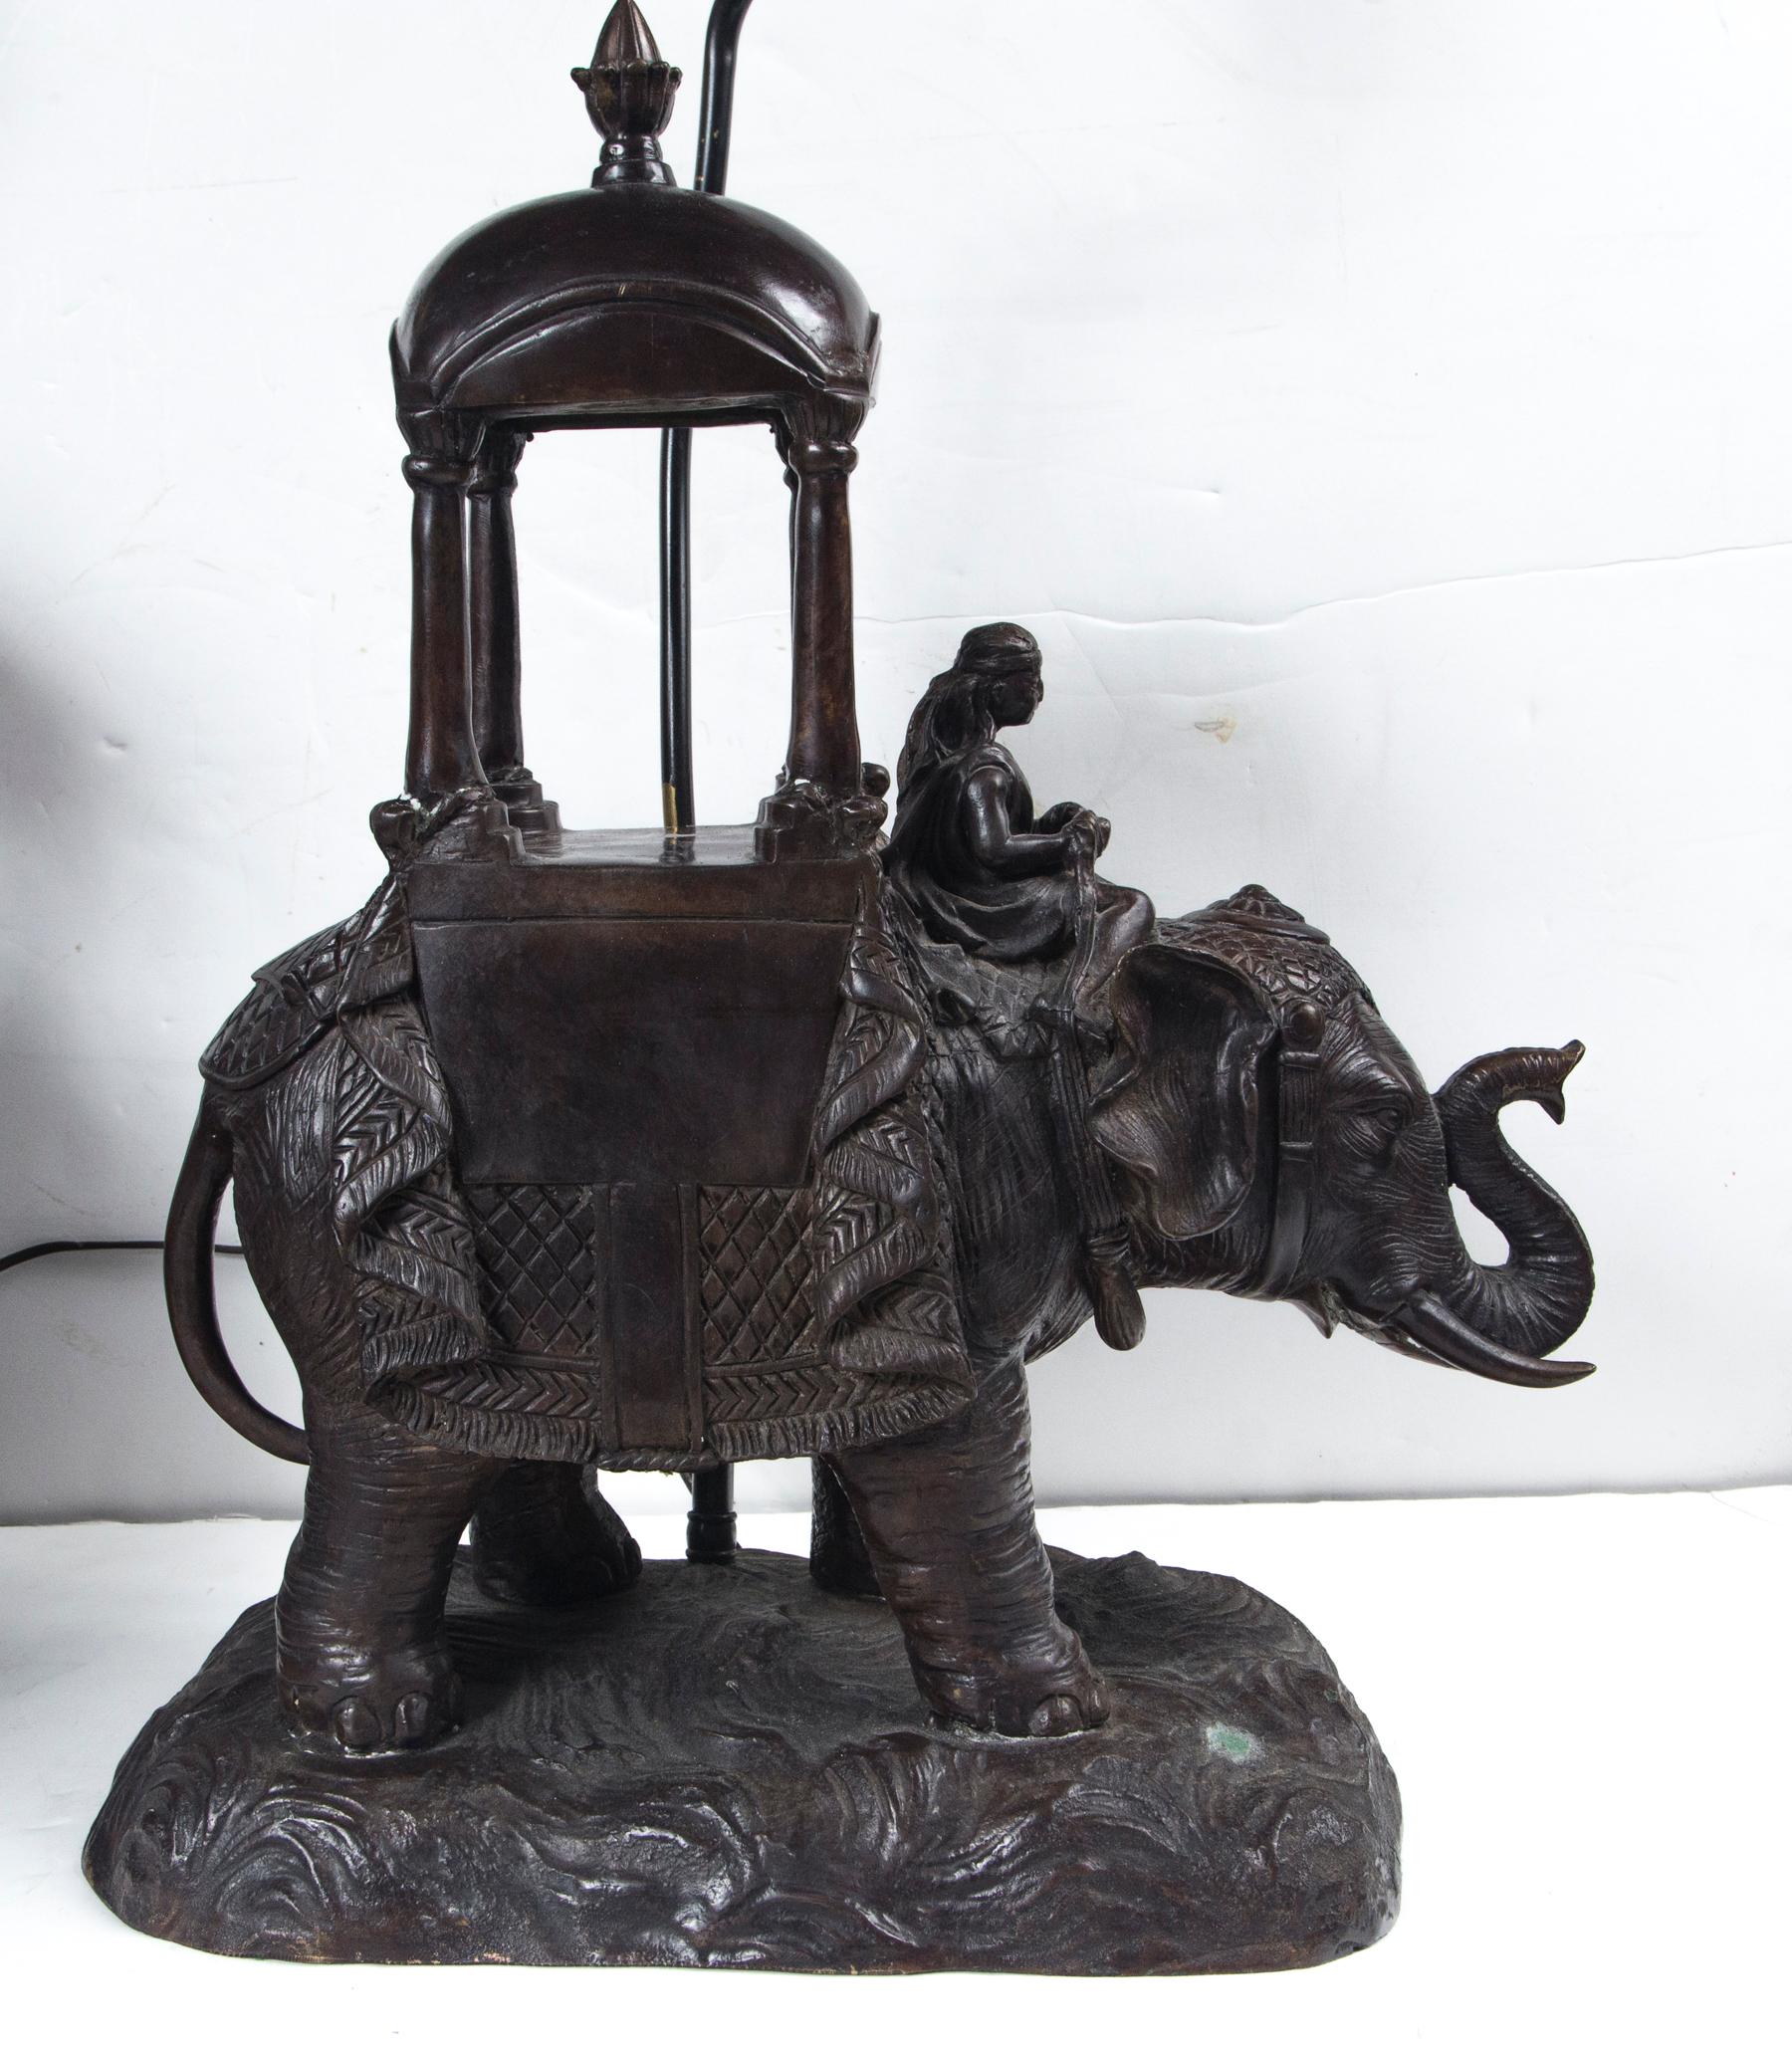 Very well cast bronze lamps. The elephant stands upon natural integral base . Traditional draping to the elephants' back and heads'
A mahoot sits on the neck of the elephants holding reigns. A howdah of 4 columns and a domed area topped by a finial,